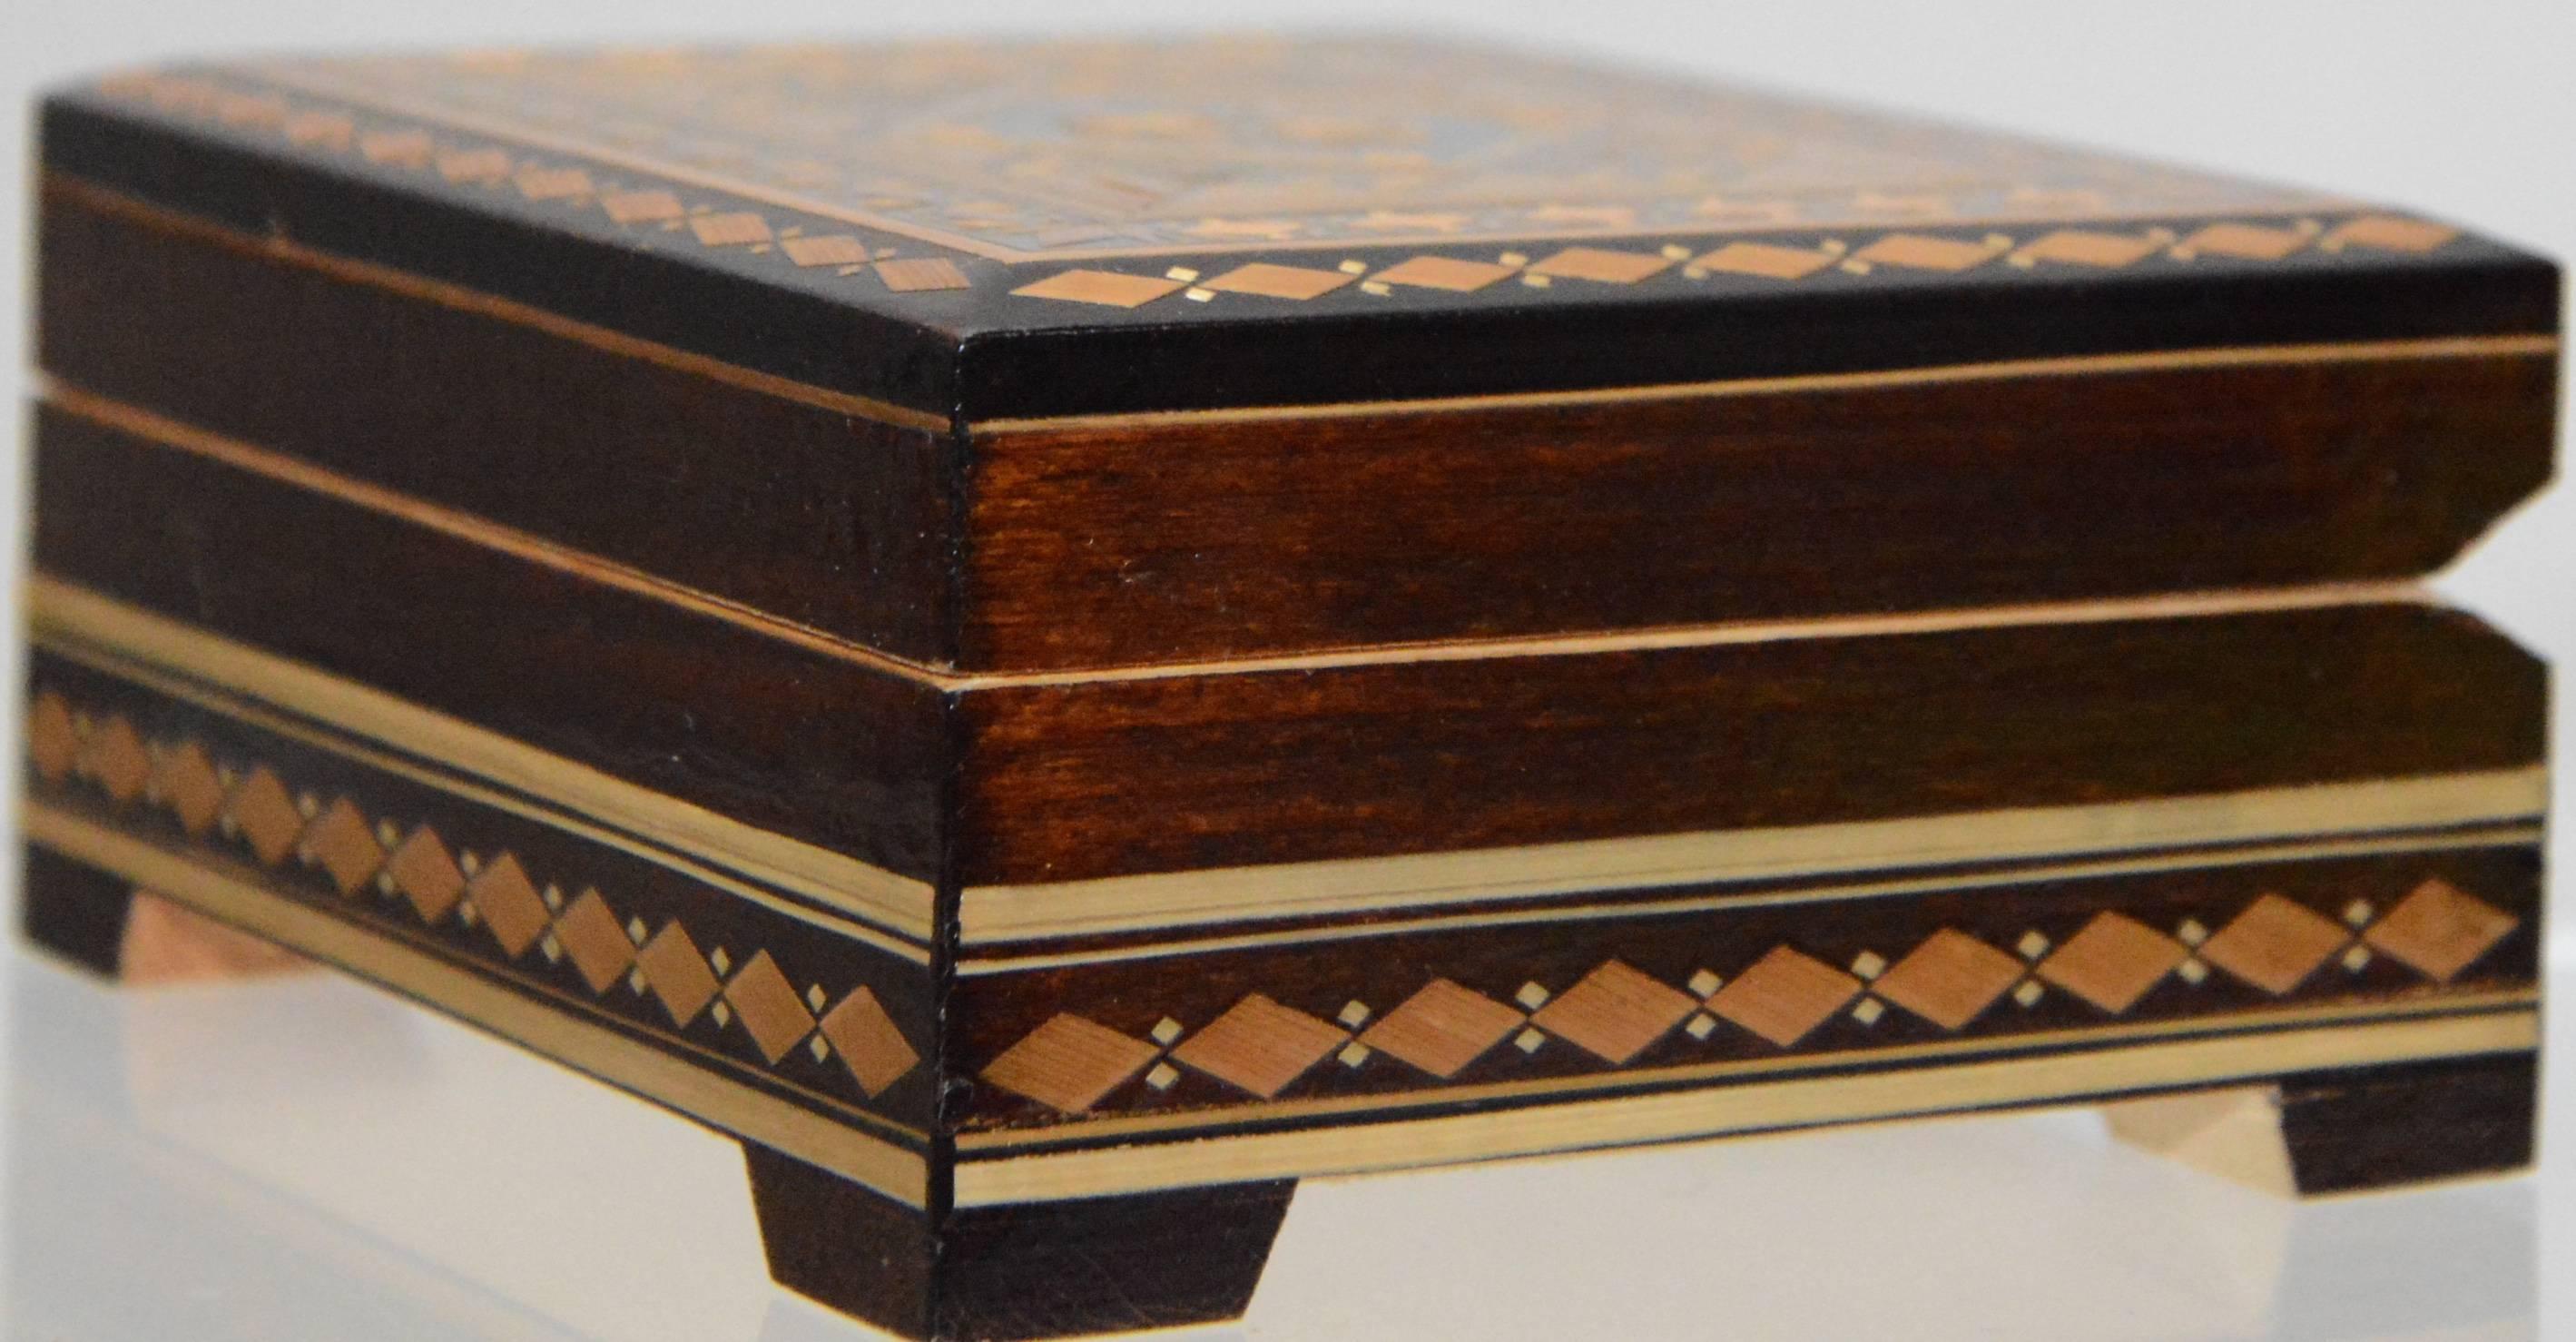 The intricate design on our box will grab your attention. Great details have been formed out of different shades of wood to make this a beautiful keepsake. The hinged lid opens to plush black lining.